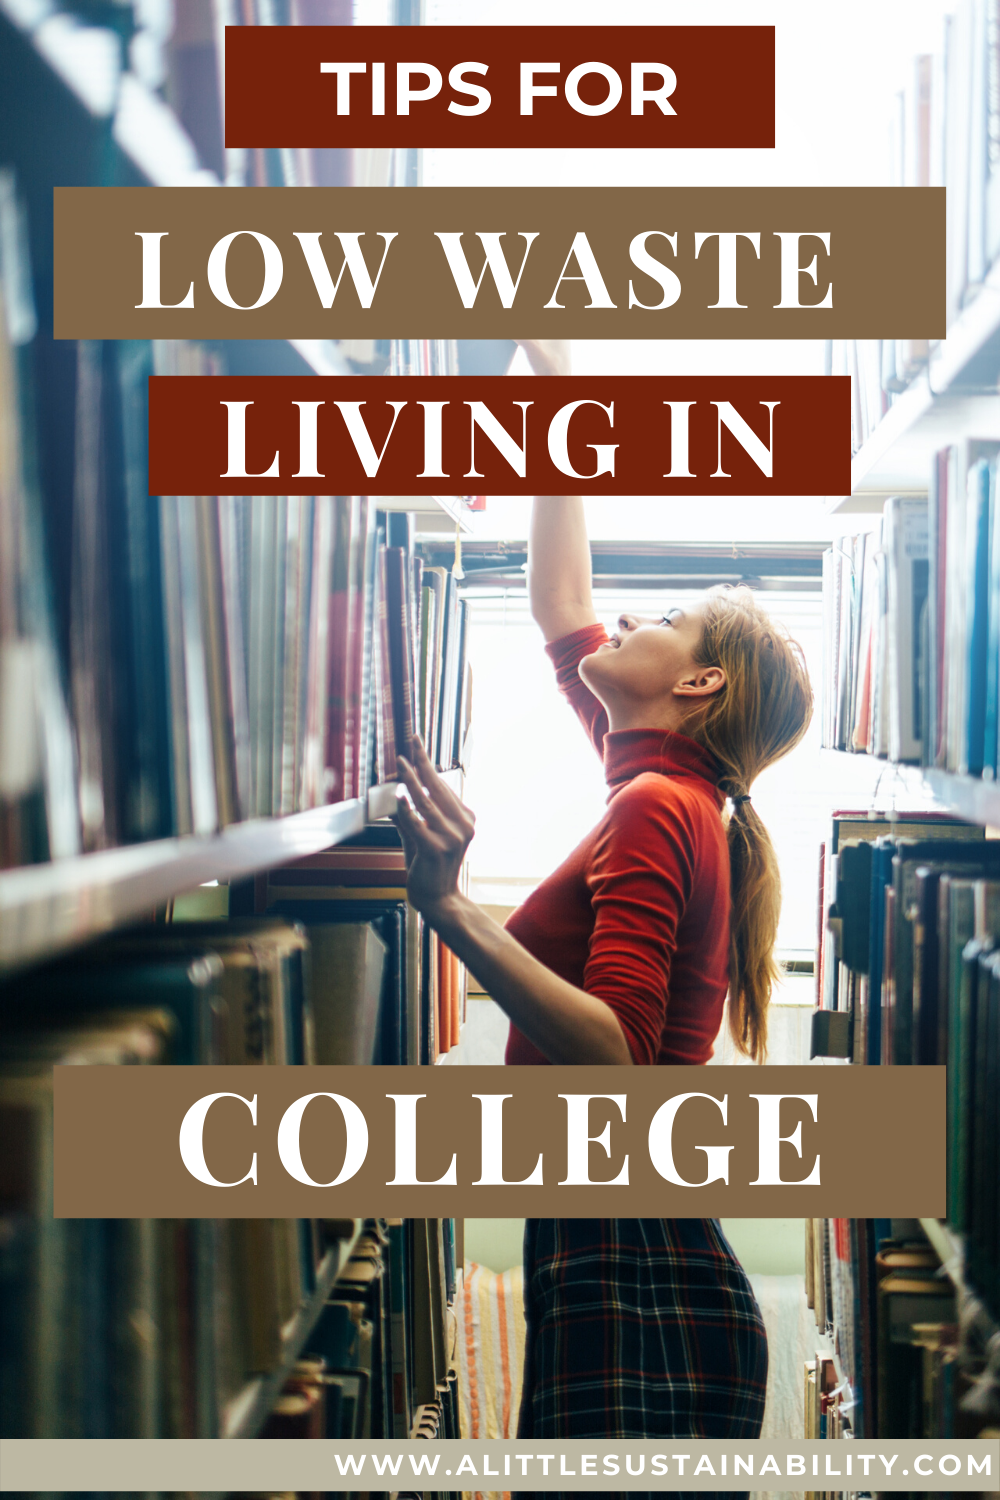 Living low waste in college is easier than you think. Transitioning to a more environmentally friendly way of living can also be a great money saver, which is great for those on a college budget. Learn more at alittlesustainability.com/how-to-live-zero-waste-in-college/